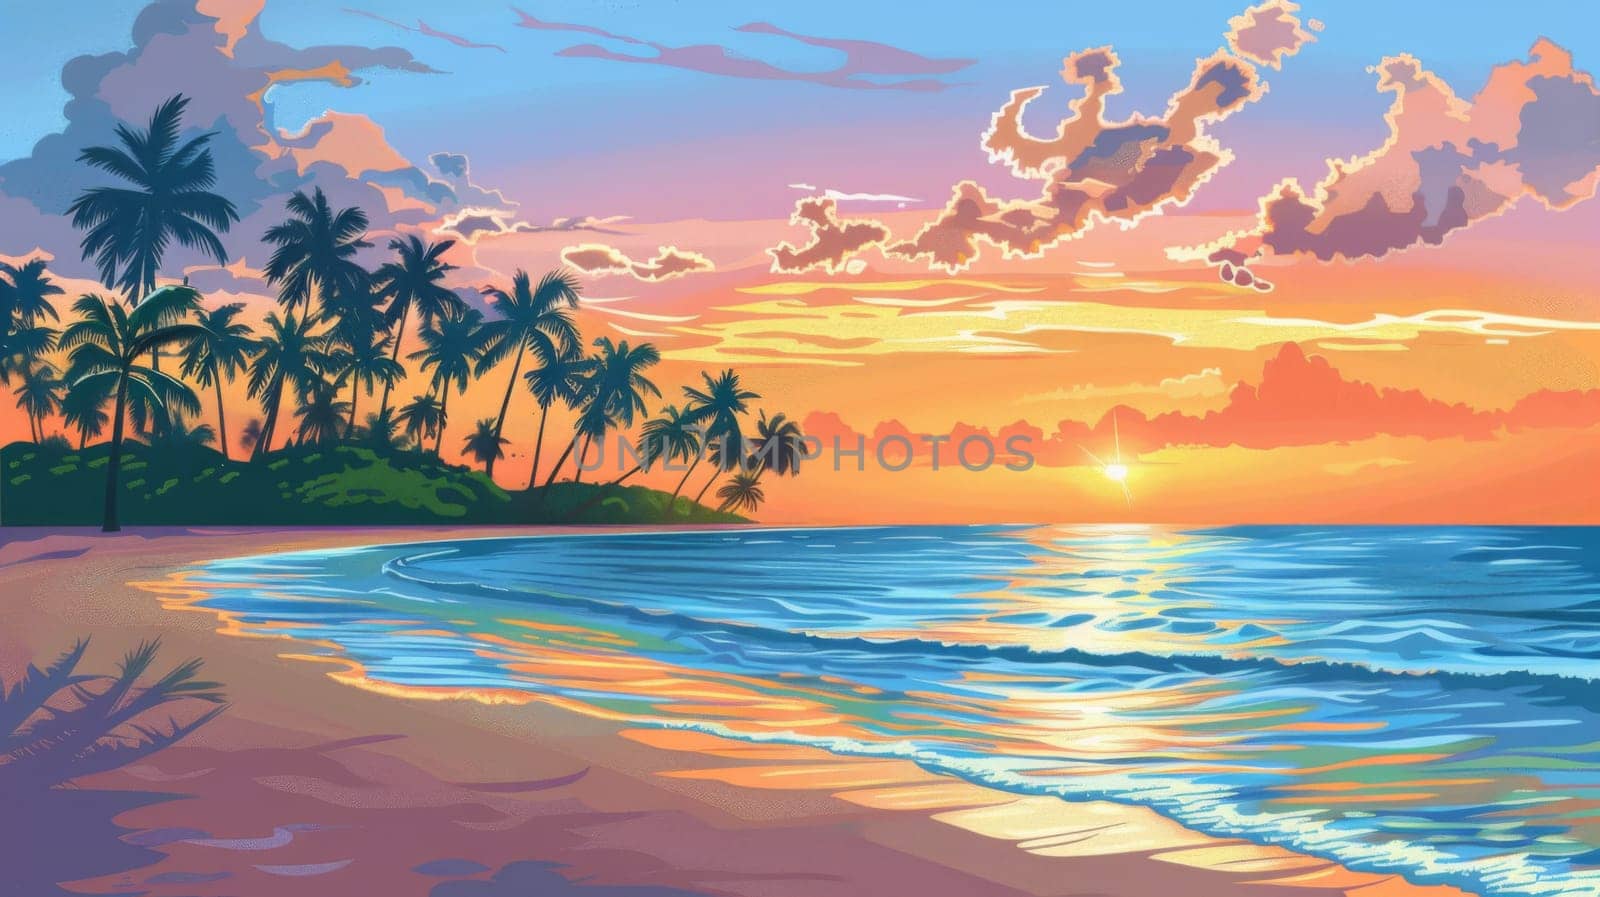 A painting of a sunset on the beach with palm trees, AI by starush